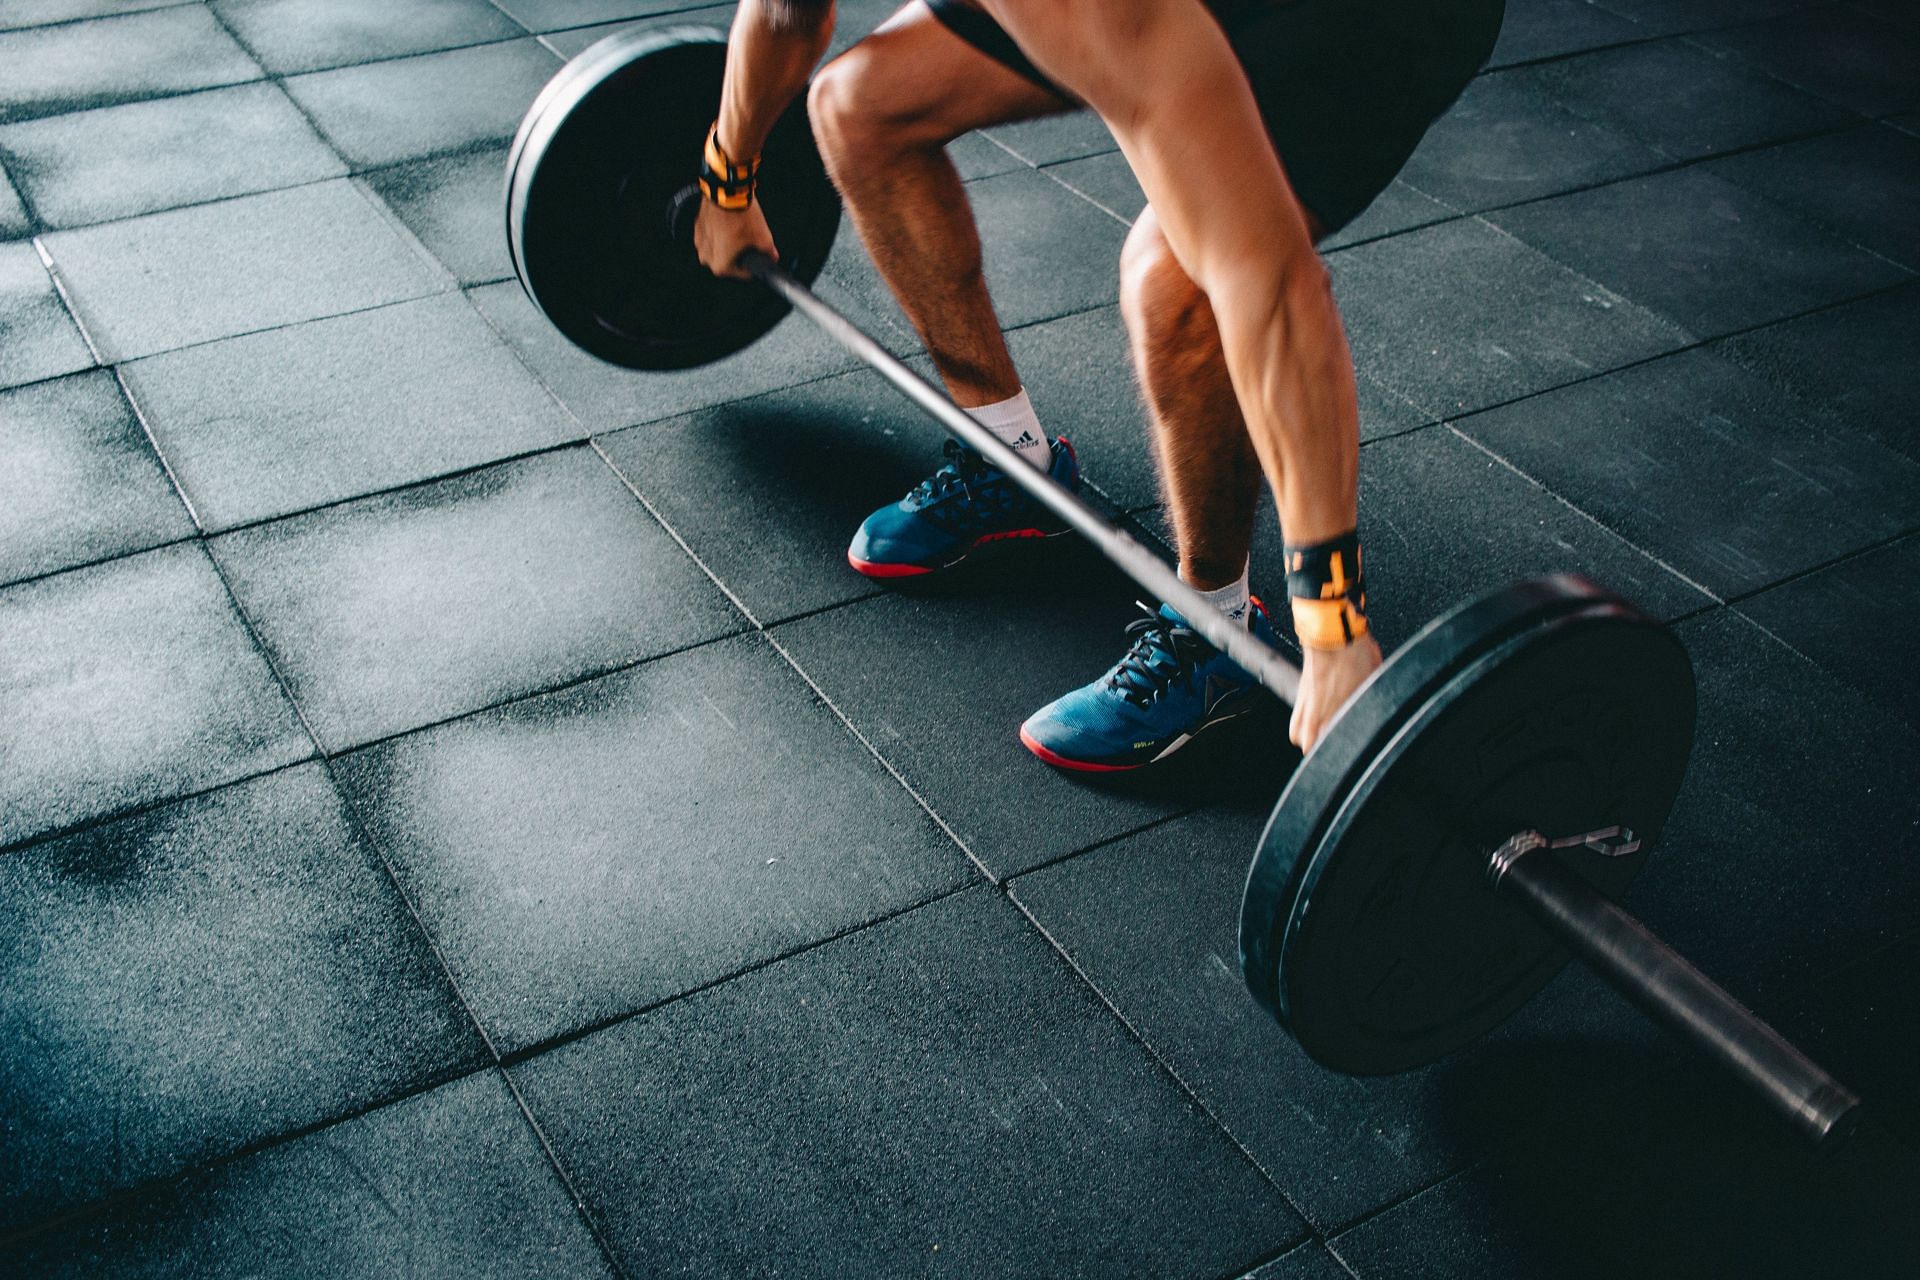 Using barbells, you can perform deadlifts for body building. (Image by Victor Freitas / Pexels)